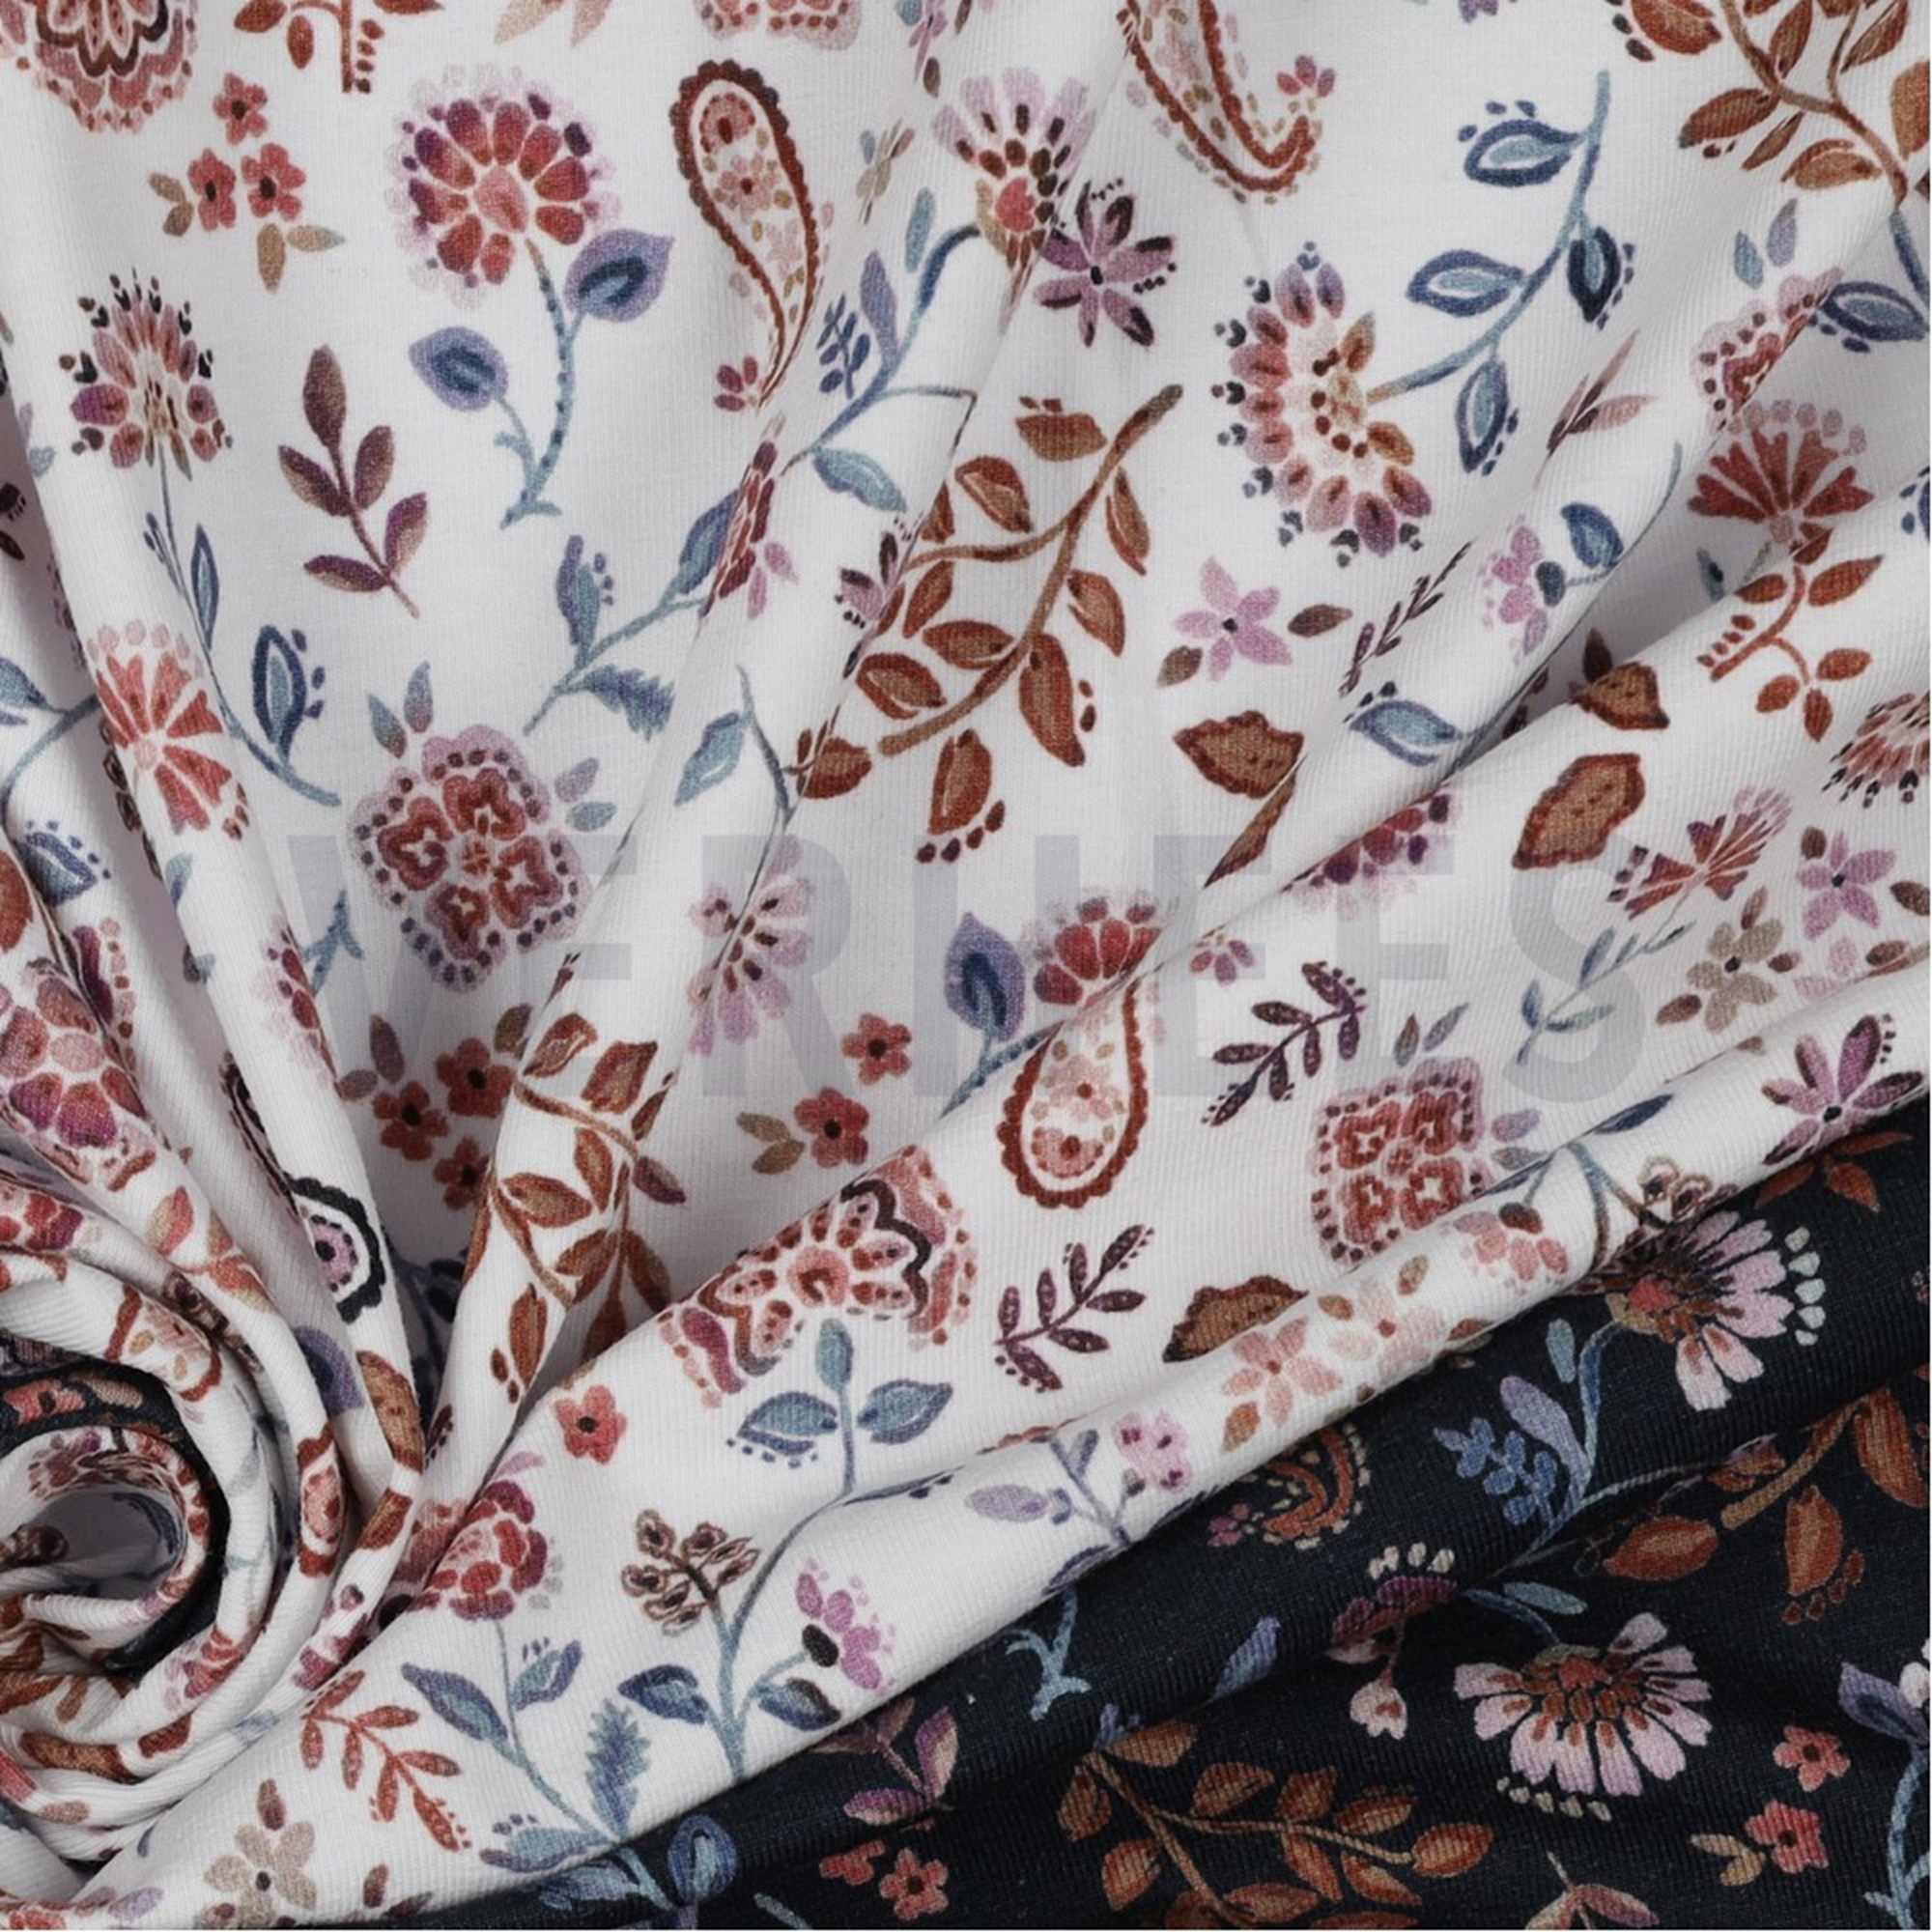 JERSEY DIGITAL PAISLEY FLOWERS WHITE LILAC (high resolution) #3